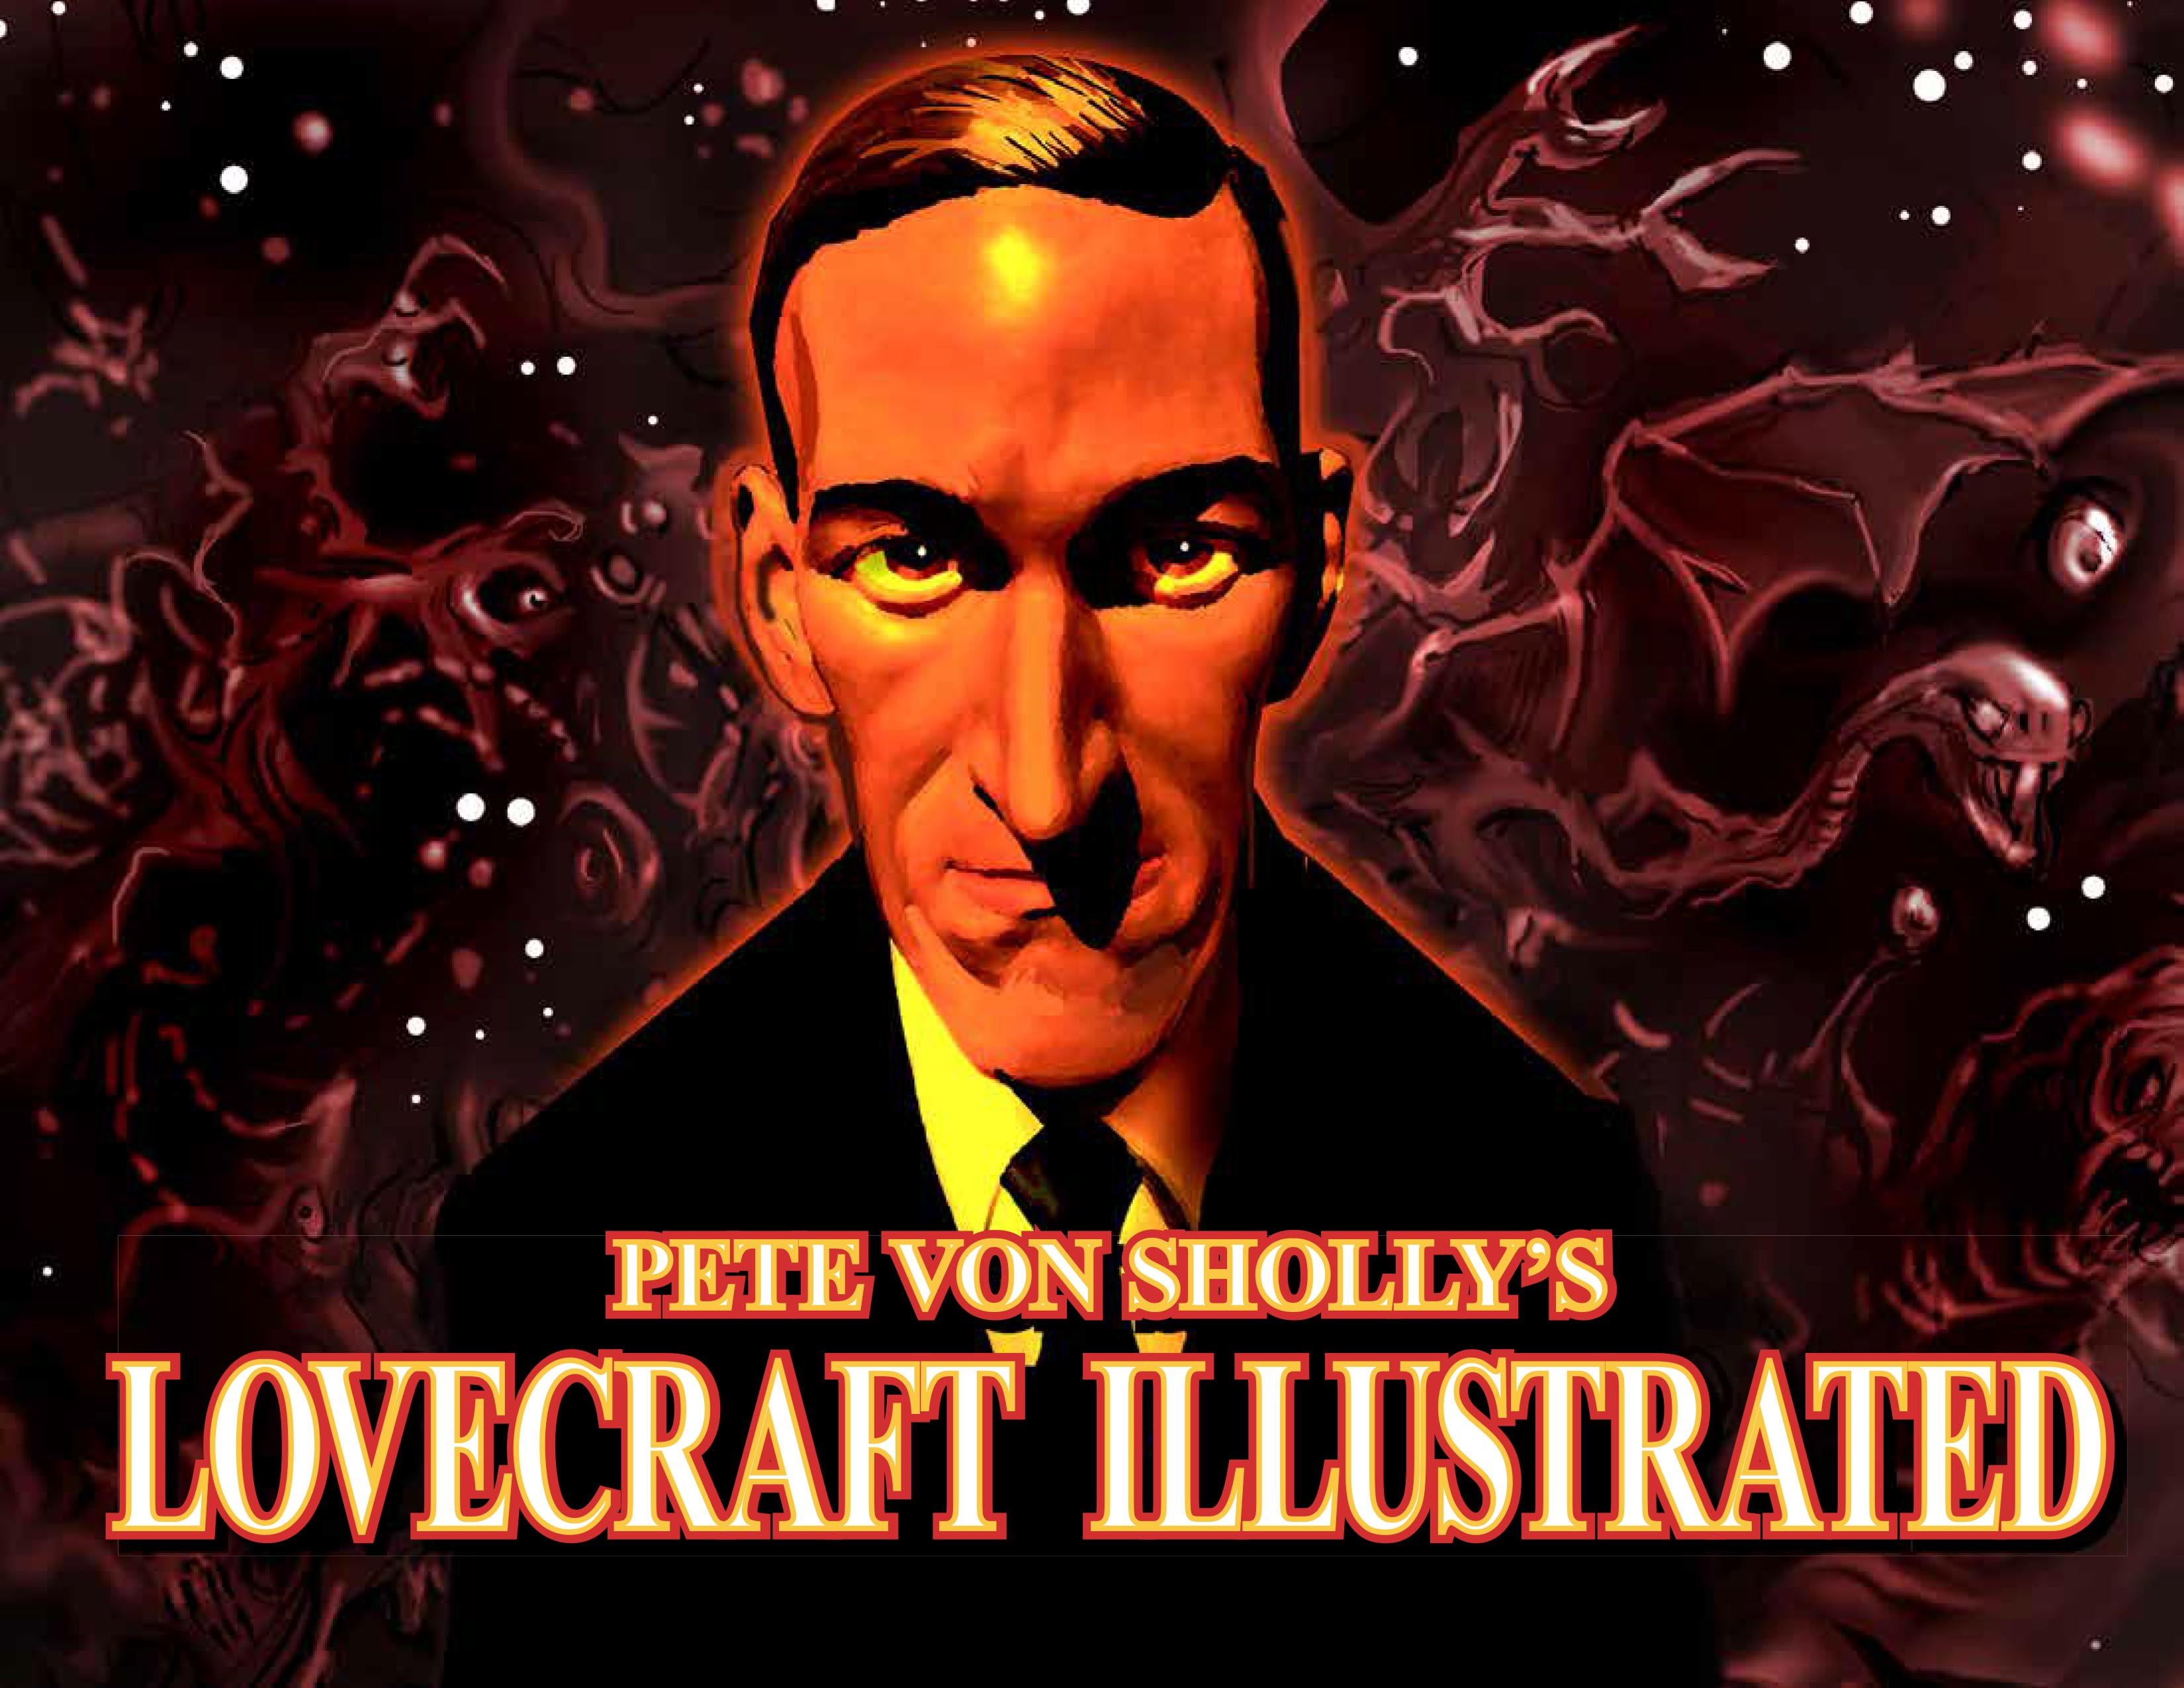 Click to expand: Pete Von Sholly's LOVECRAFT ILLUSTRATED (limited edition illustrated book cover)